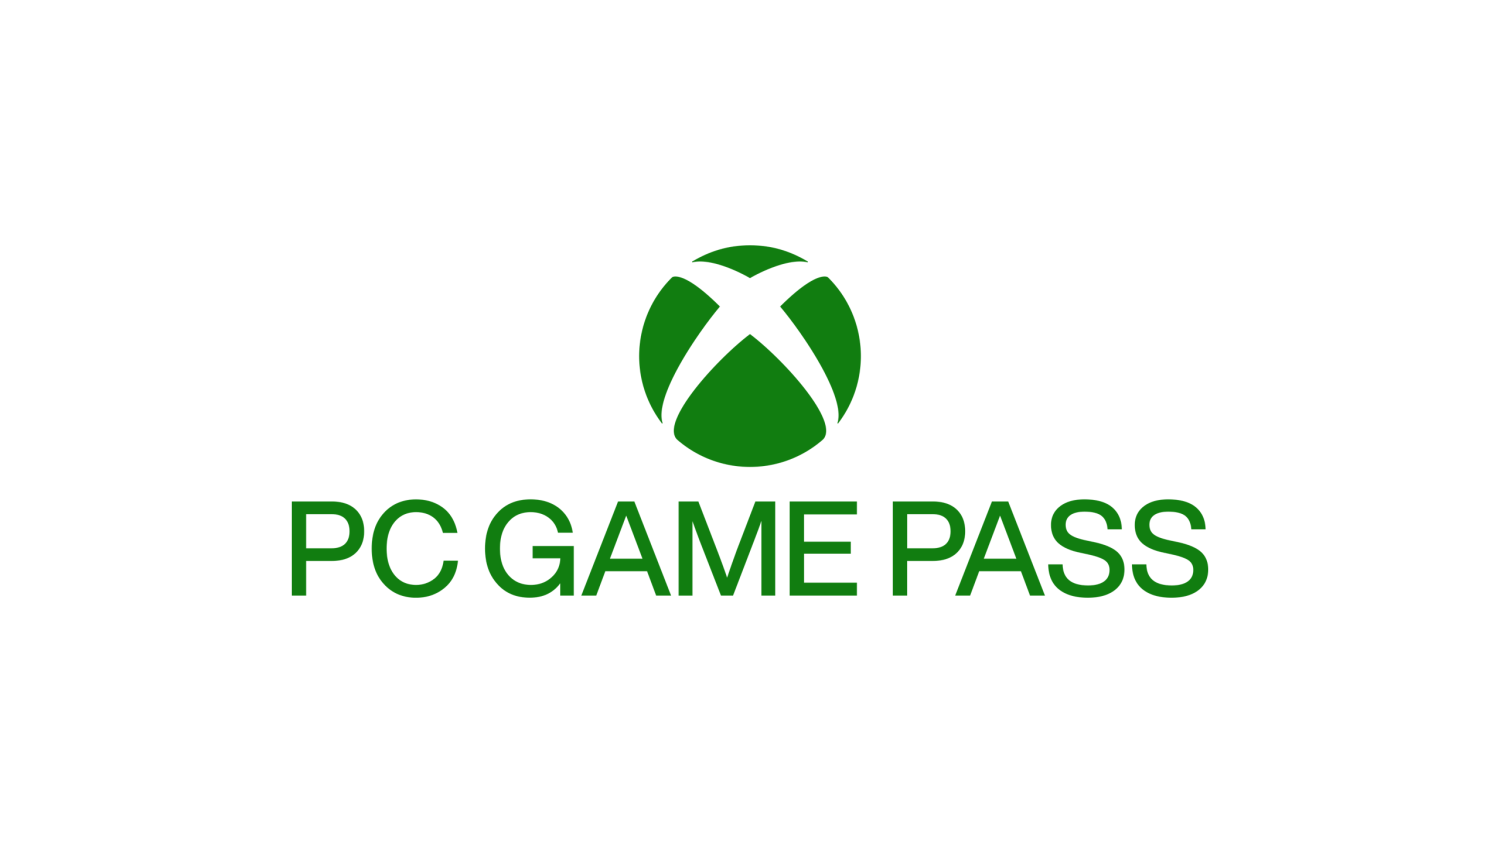 How Does Microsoft Game Pass Work On Pc?